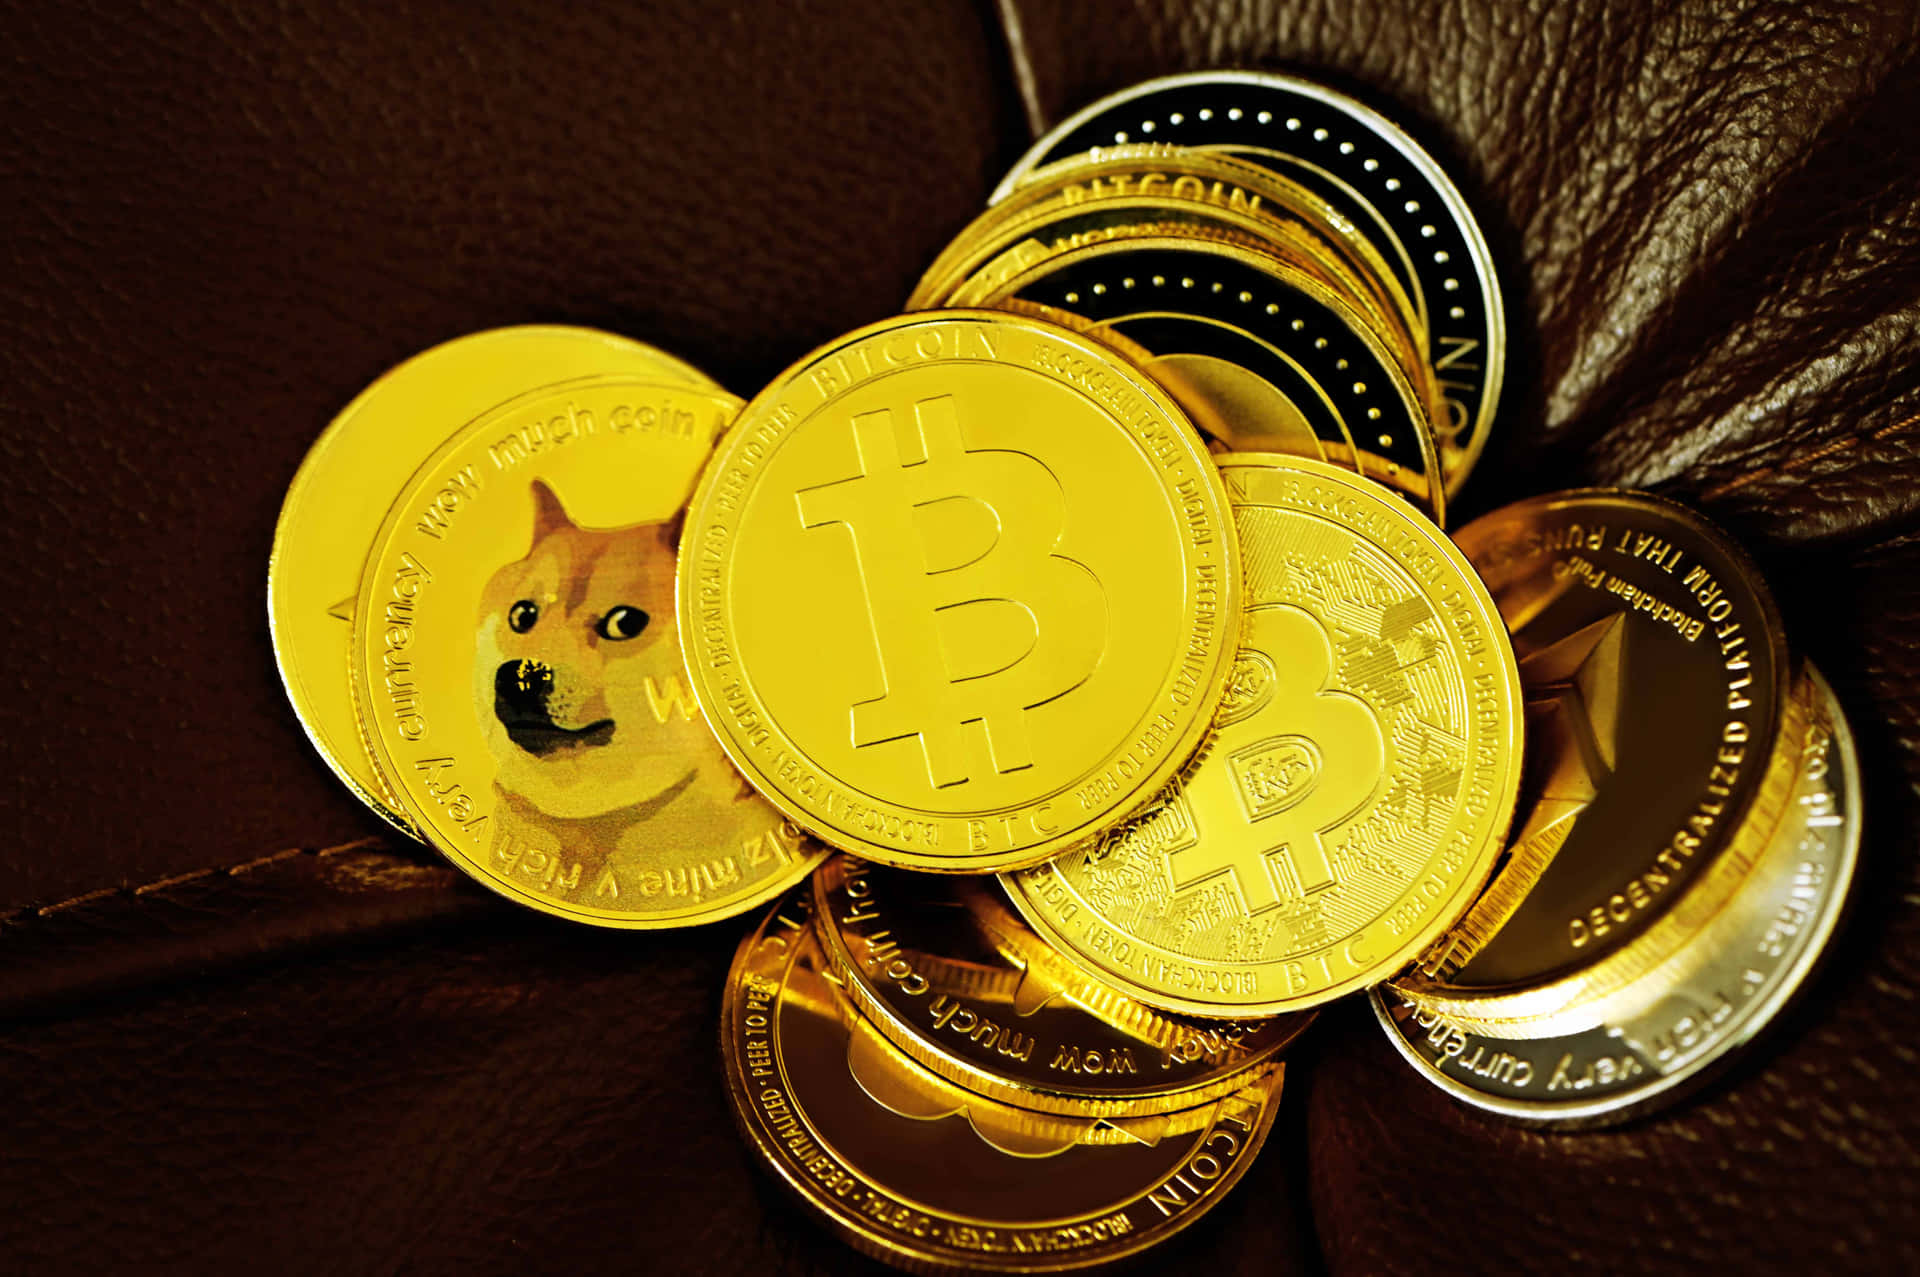 Dogecoin Digital Currency Soaring High